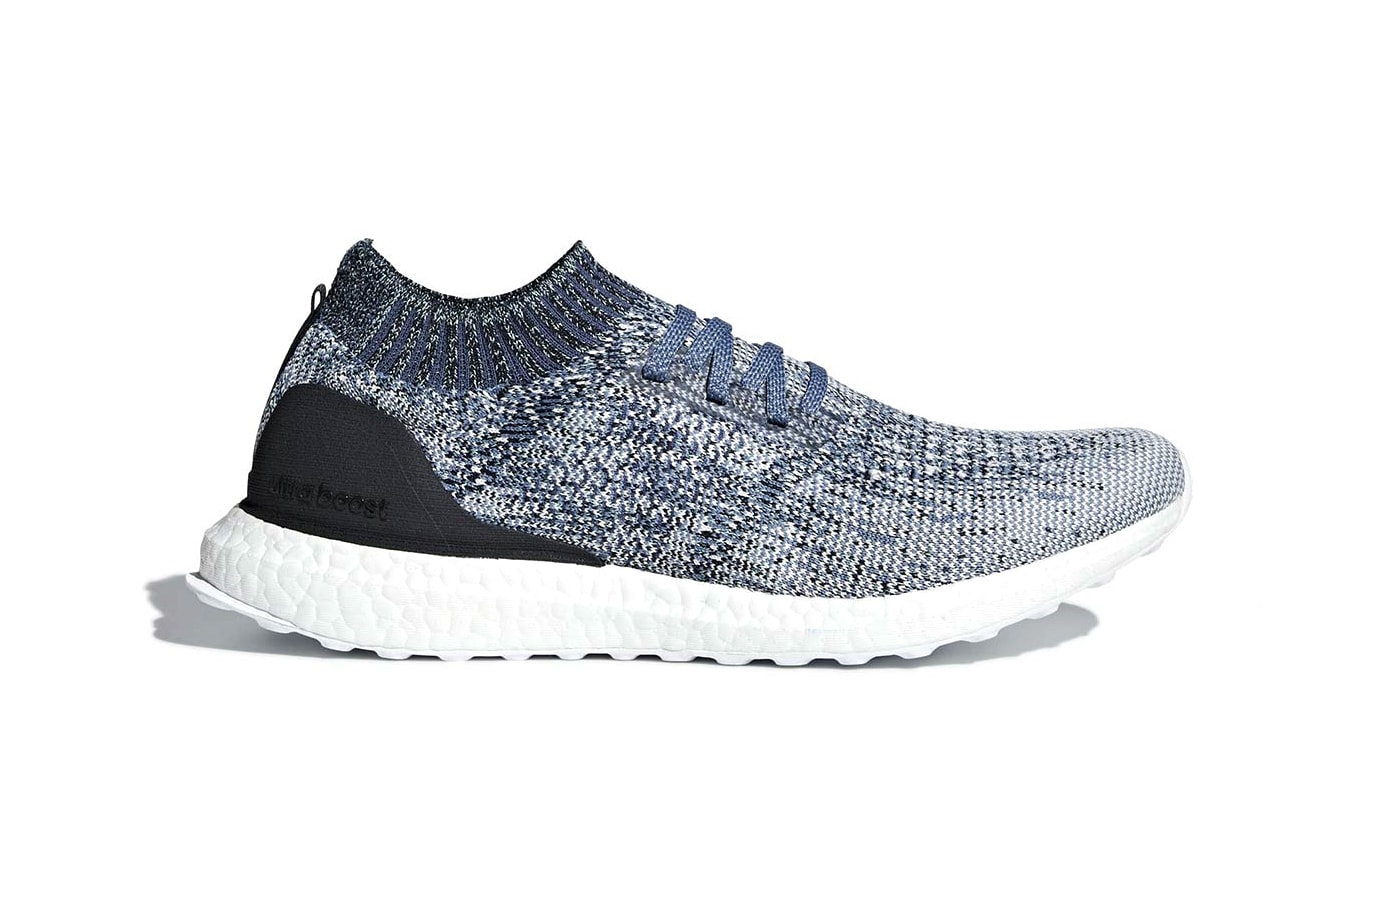 Parley adidas UltraBOOST Uncaged ultra boost june 2018 release date info drop sneakers shoes footwear for the oceans plastic